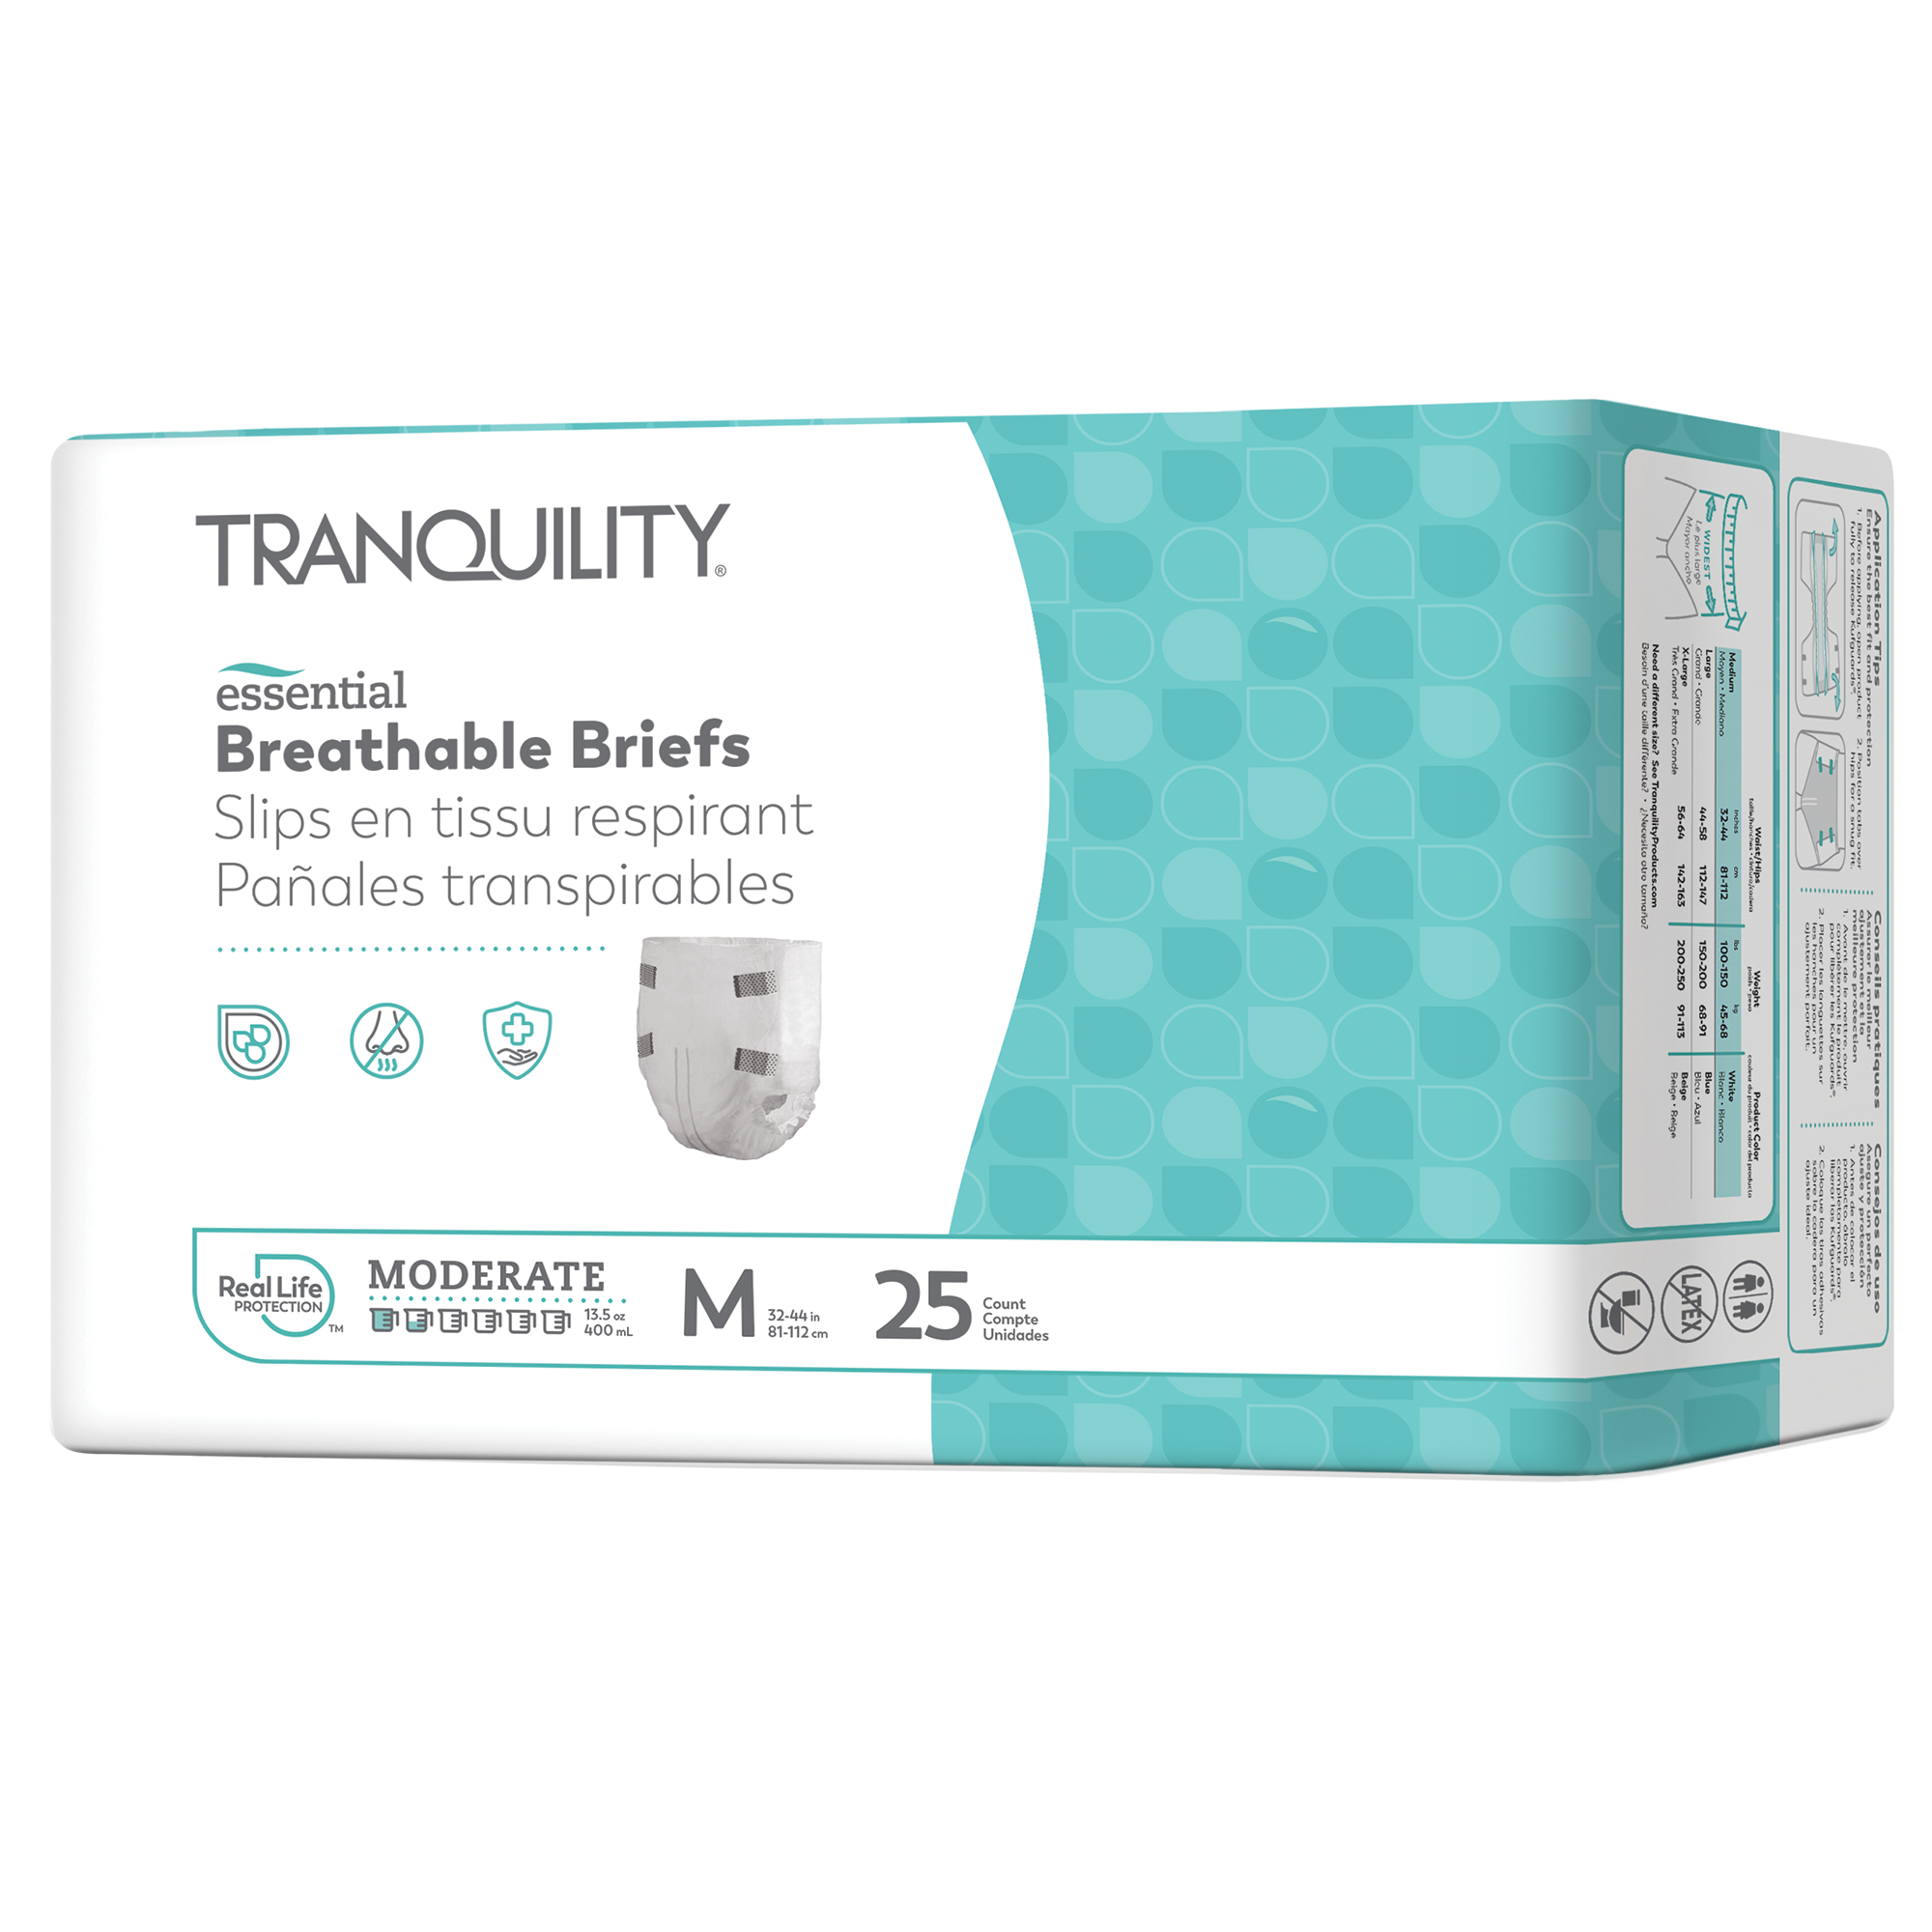 Tranquility Essential Breathable Briefs - Moderate Absorbency